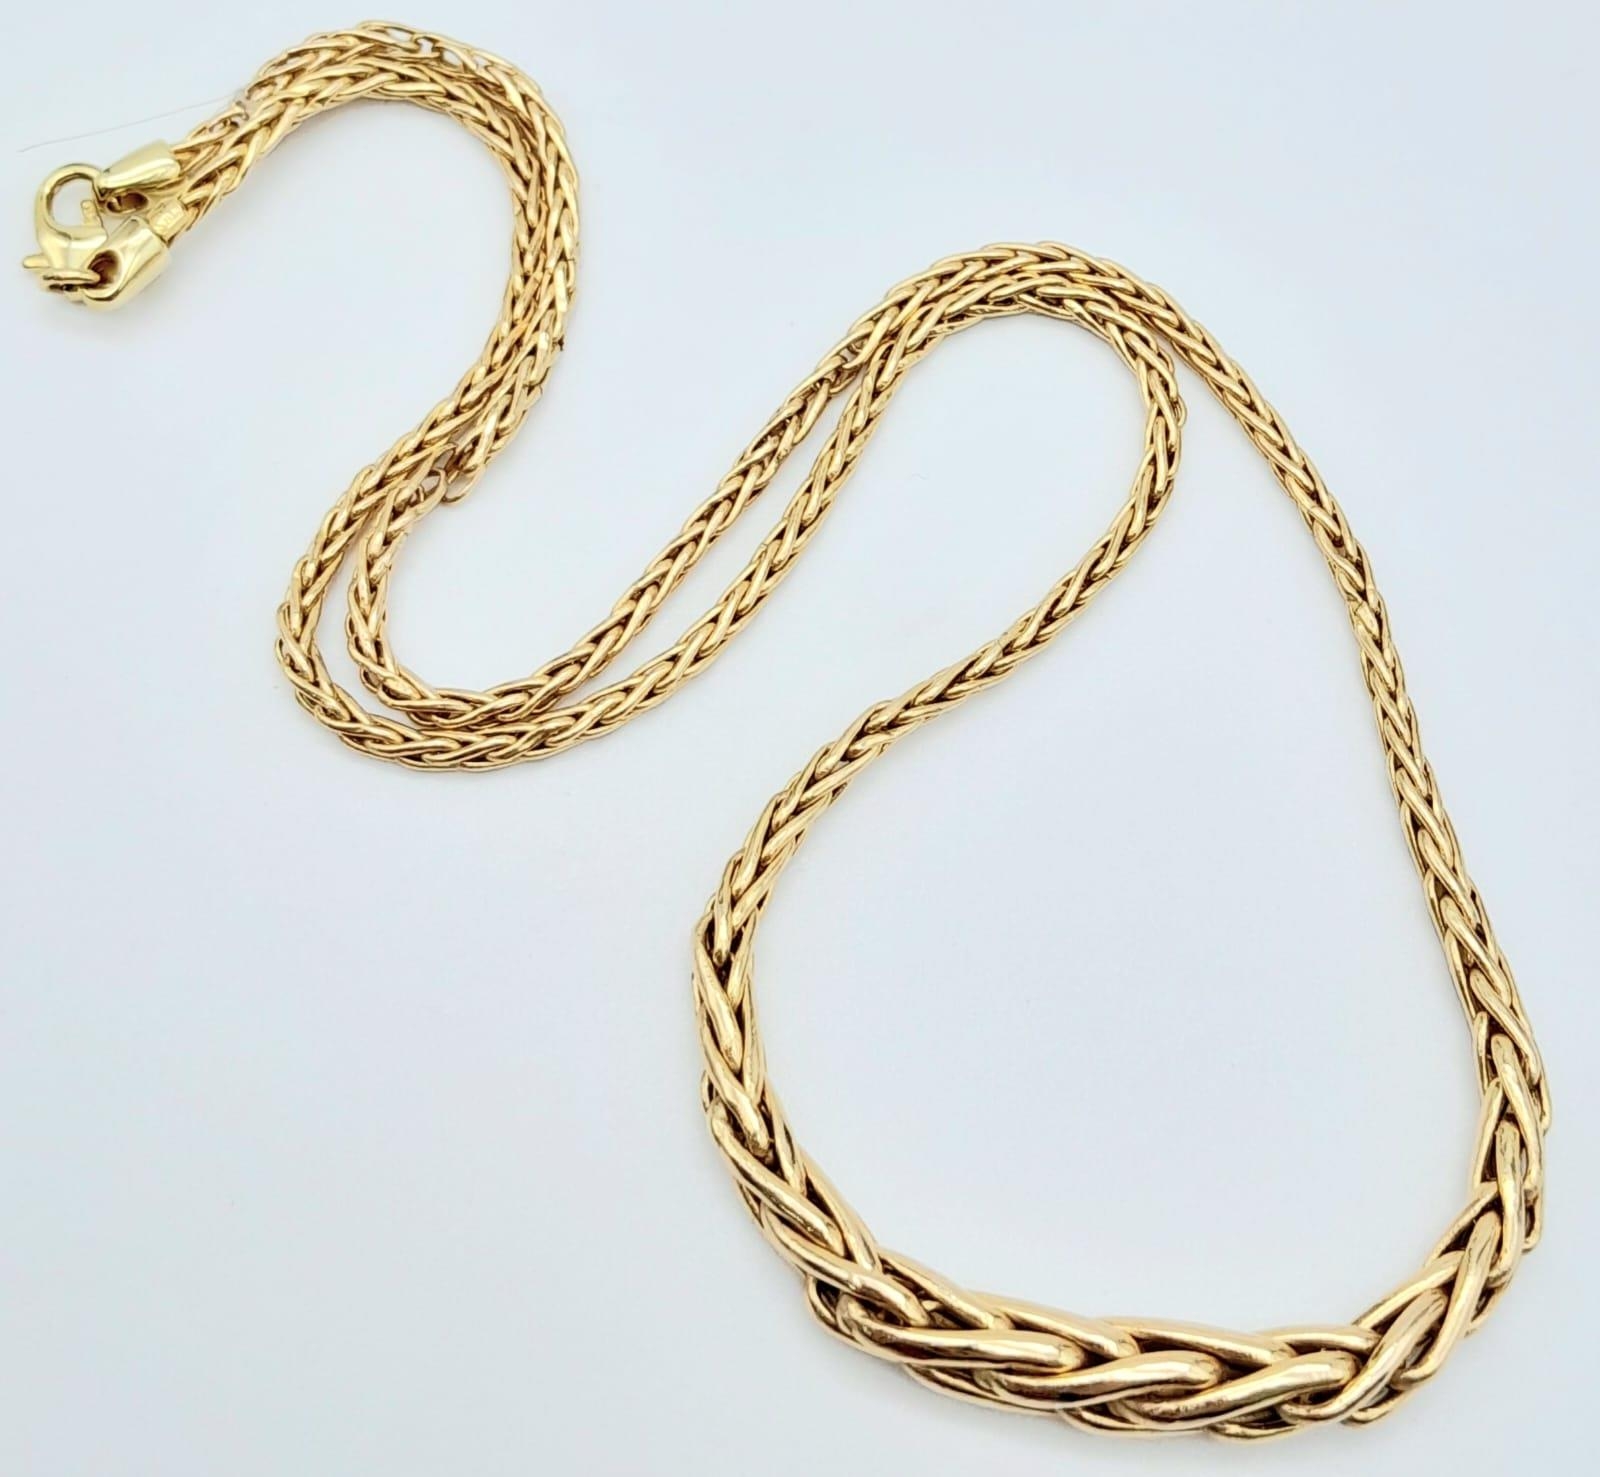 A Vintage 9K Yellow Gold Woven Link Necklace. 42cm length. 5.7g weight. - Image 3 of 6